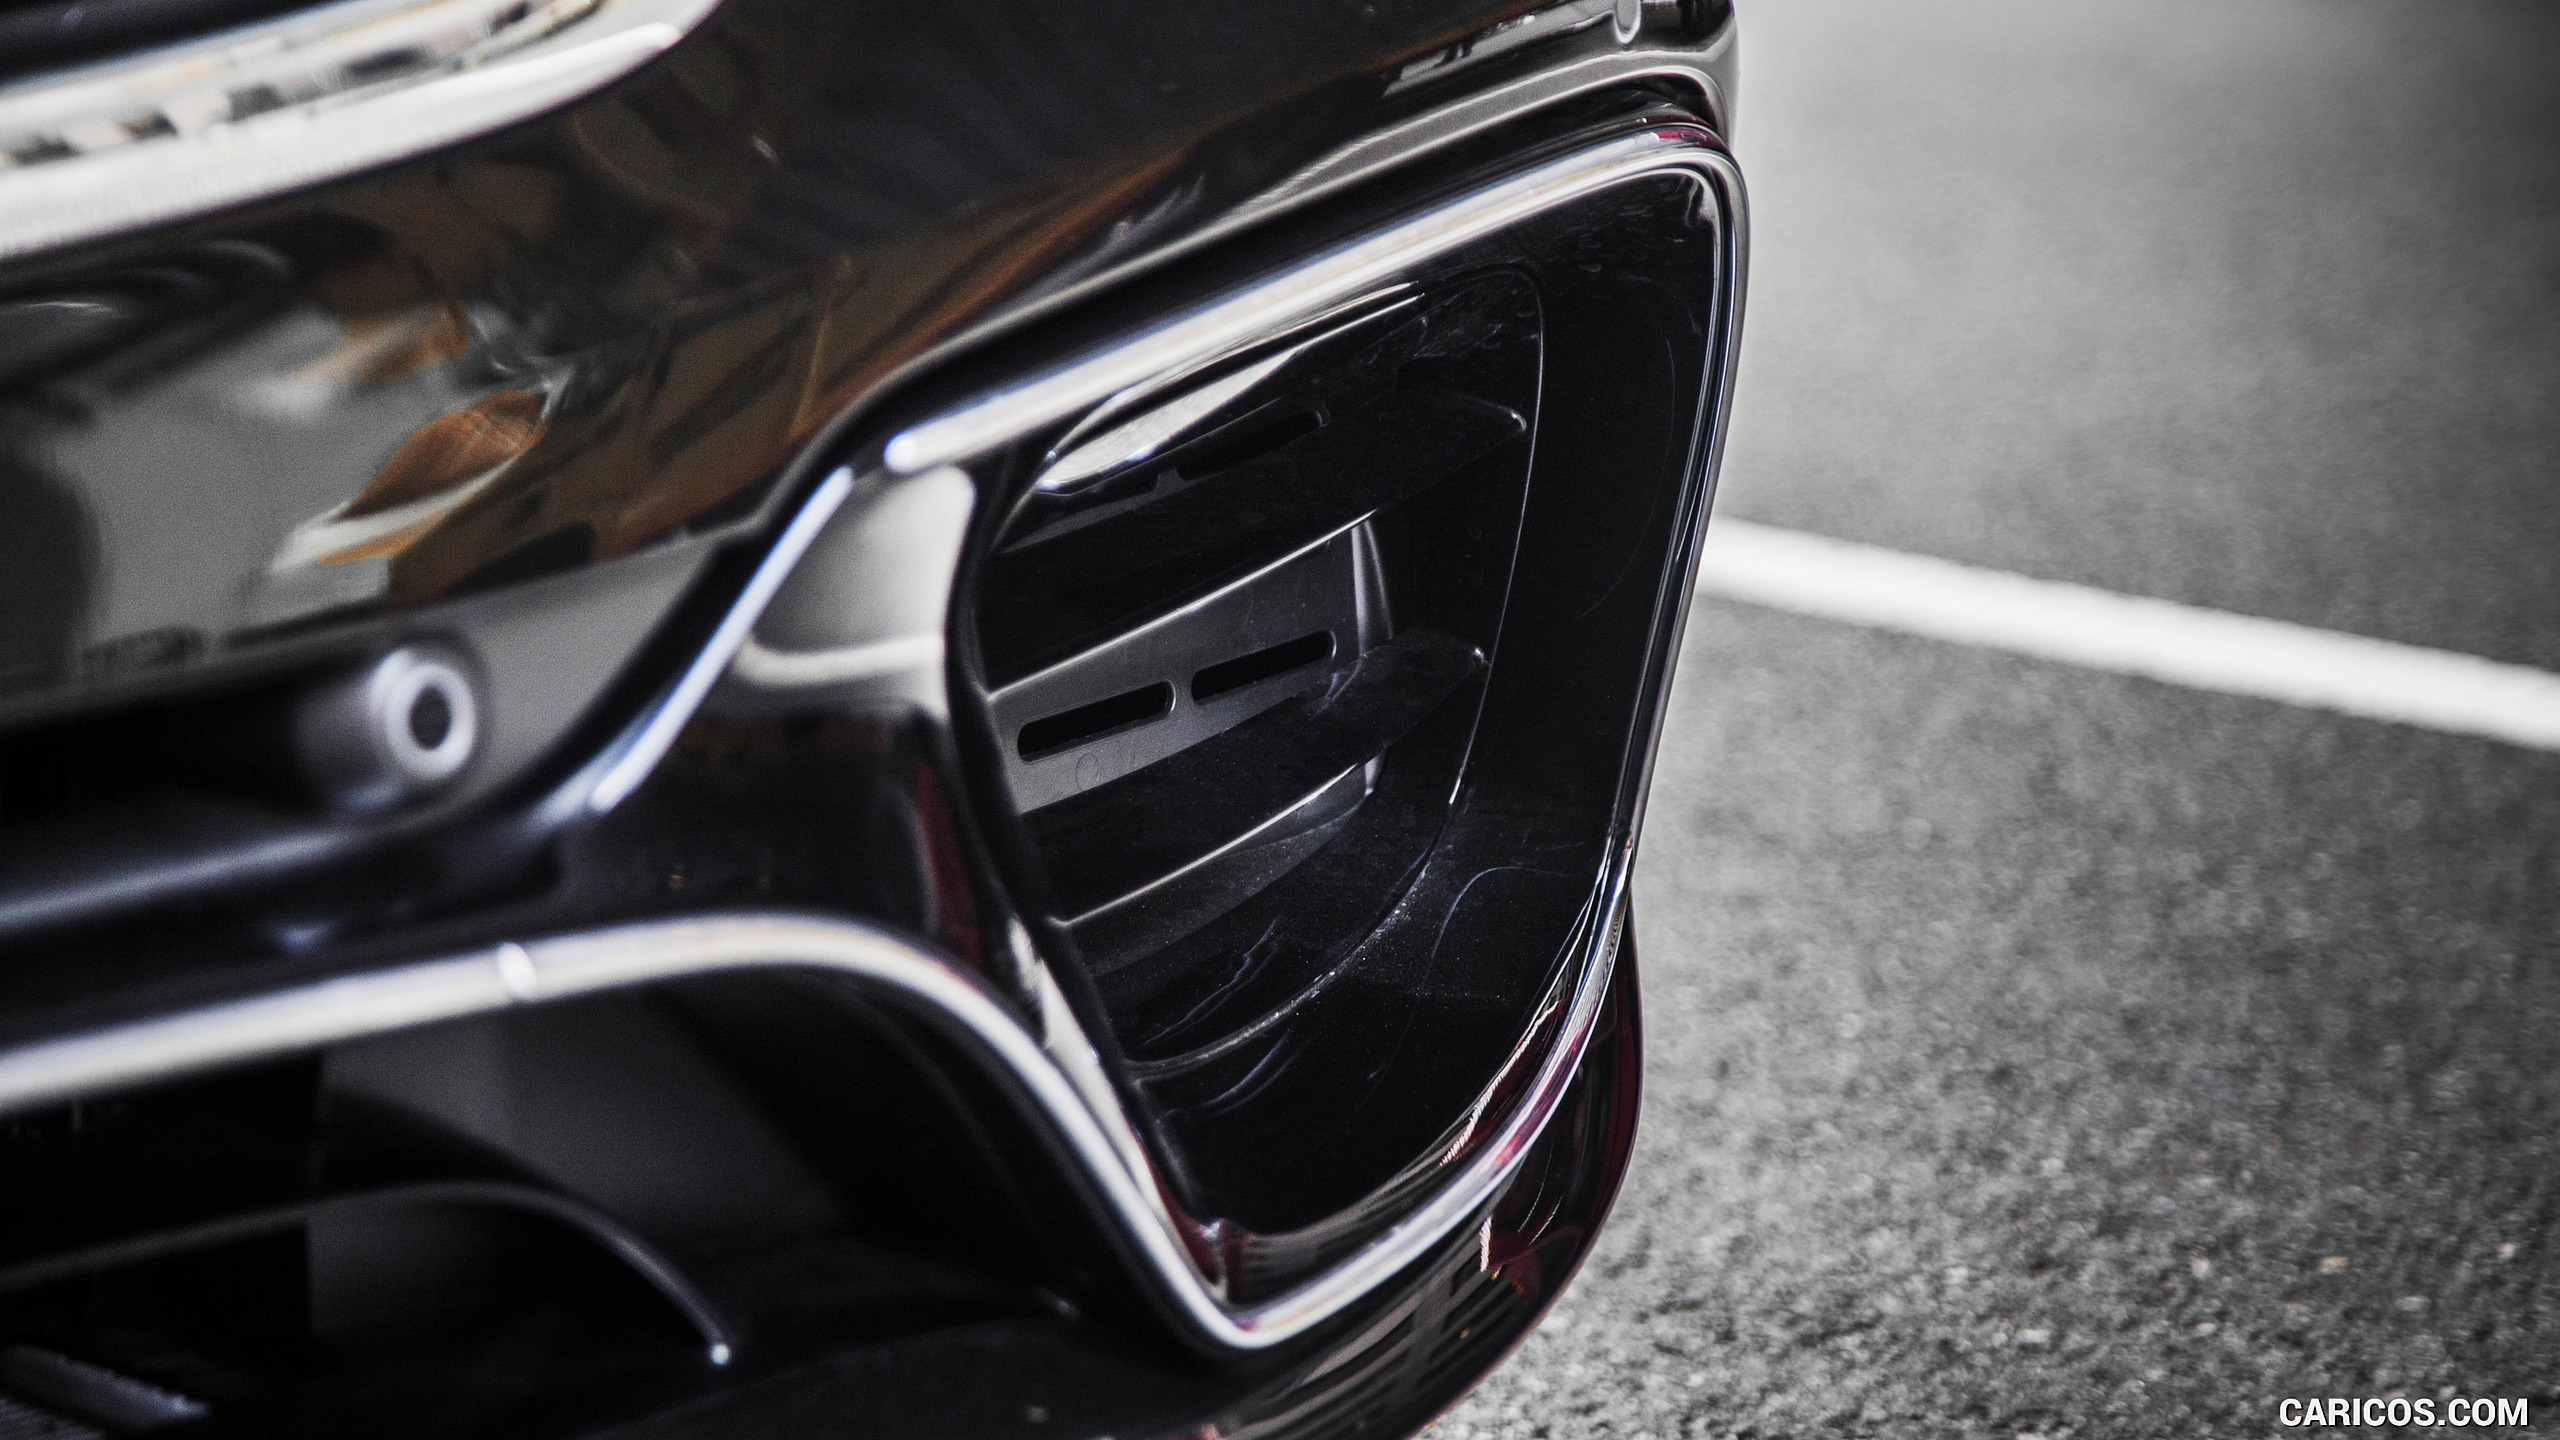 2018 Mercedes-AMG S63 - Detail, #92 of 100